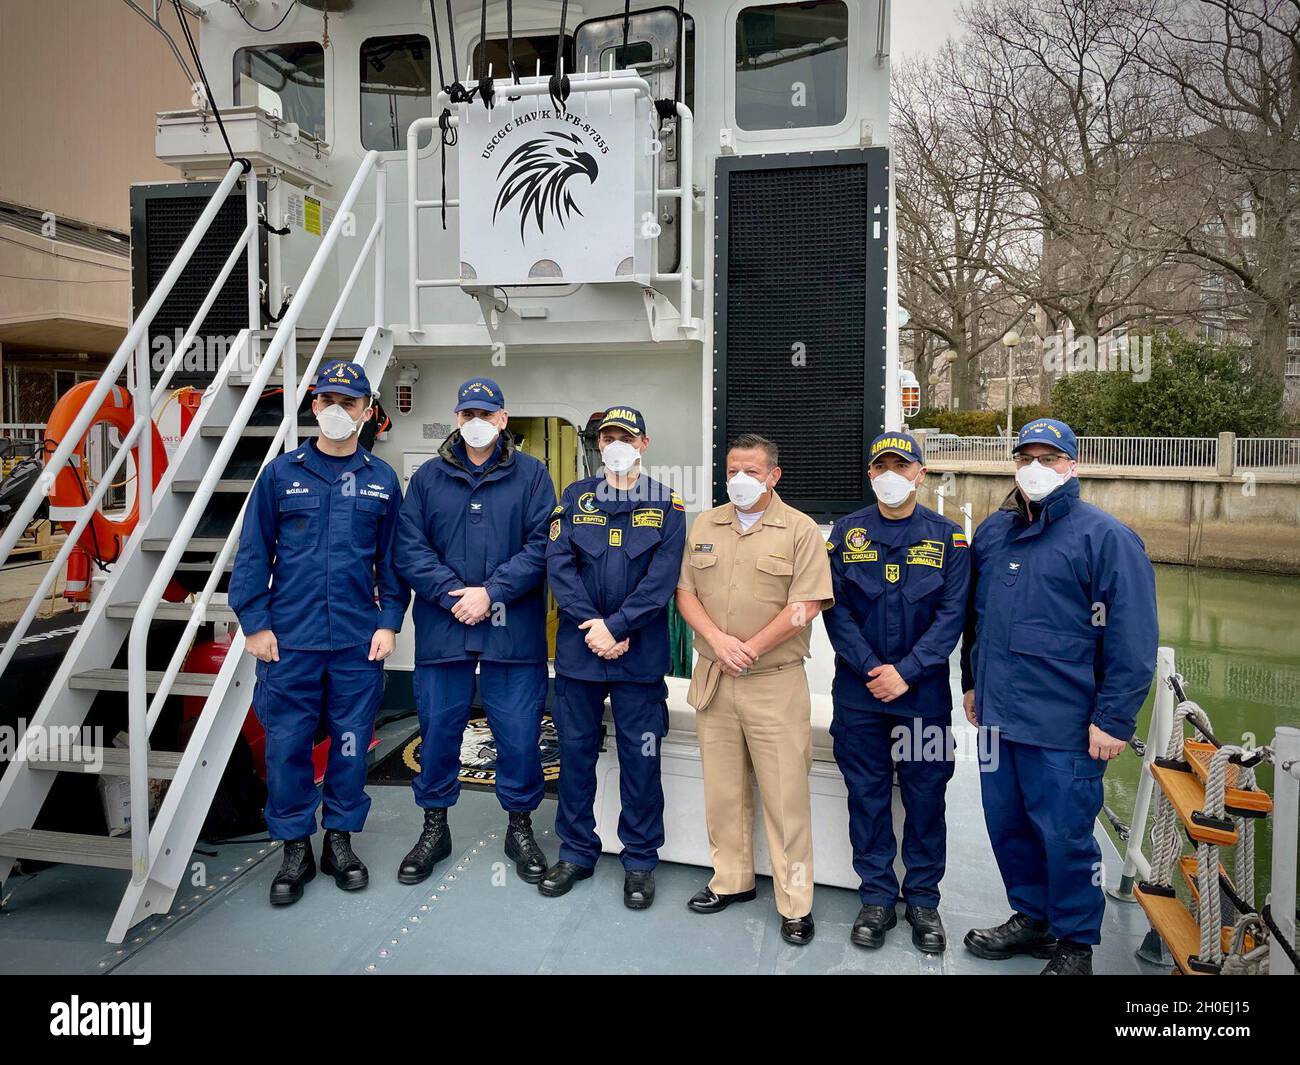 WASHINGTON D.C. (Feb. 12, 2021) — The command of USCGC Hawk (WPB 87355), hosts members of the Colombian Embassy to discuss Coast Guard operations aboard USCGC Hawk (WPB 87355) on the Potomac River in Washington D.C. on Feb. 12, 2021. The visit provided an opportunity for familiarization with U.S. Coast Guard sea-service operations and ships. Hawk is an 87-foot Marine Protector-Class patrol boat home-ported in Virginia Beach, Virginia, with a crew of 12. Stock Photo